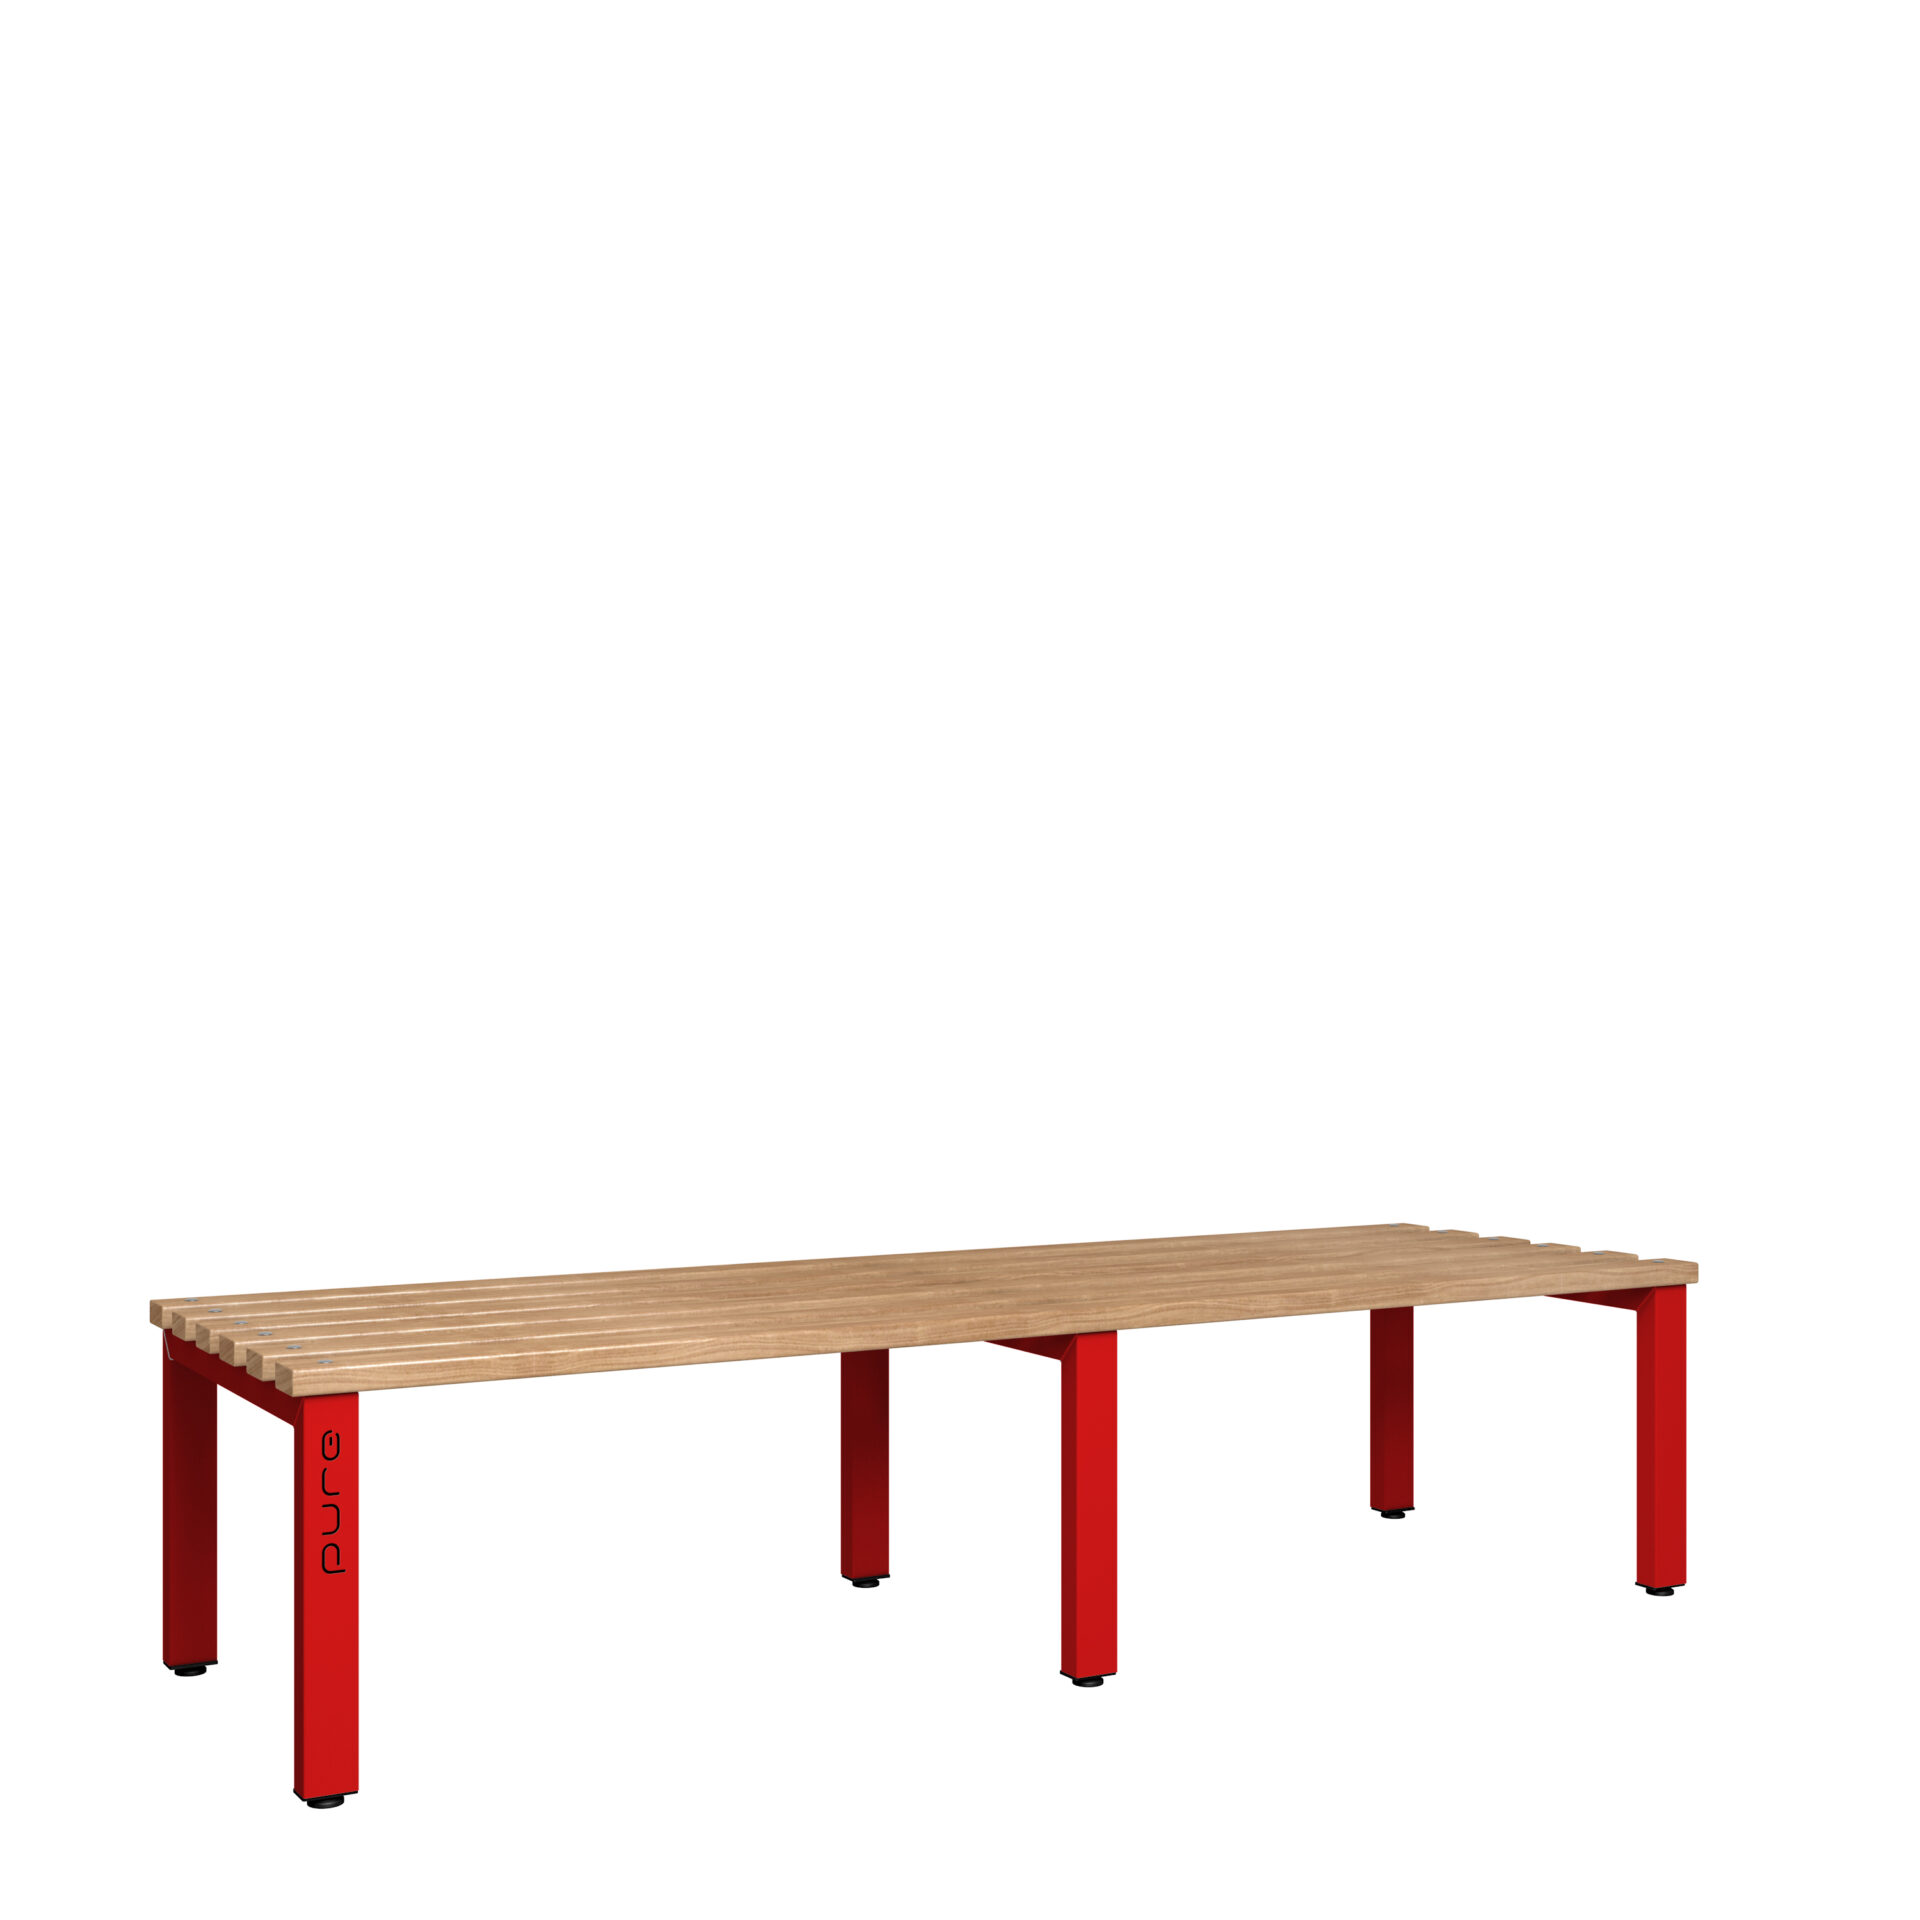 Pure Carbon Zero Double Sided 2000mm Standard Bench - Flame Red / Solid Timber